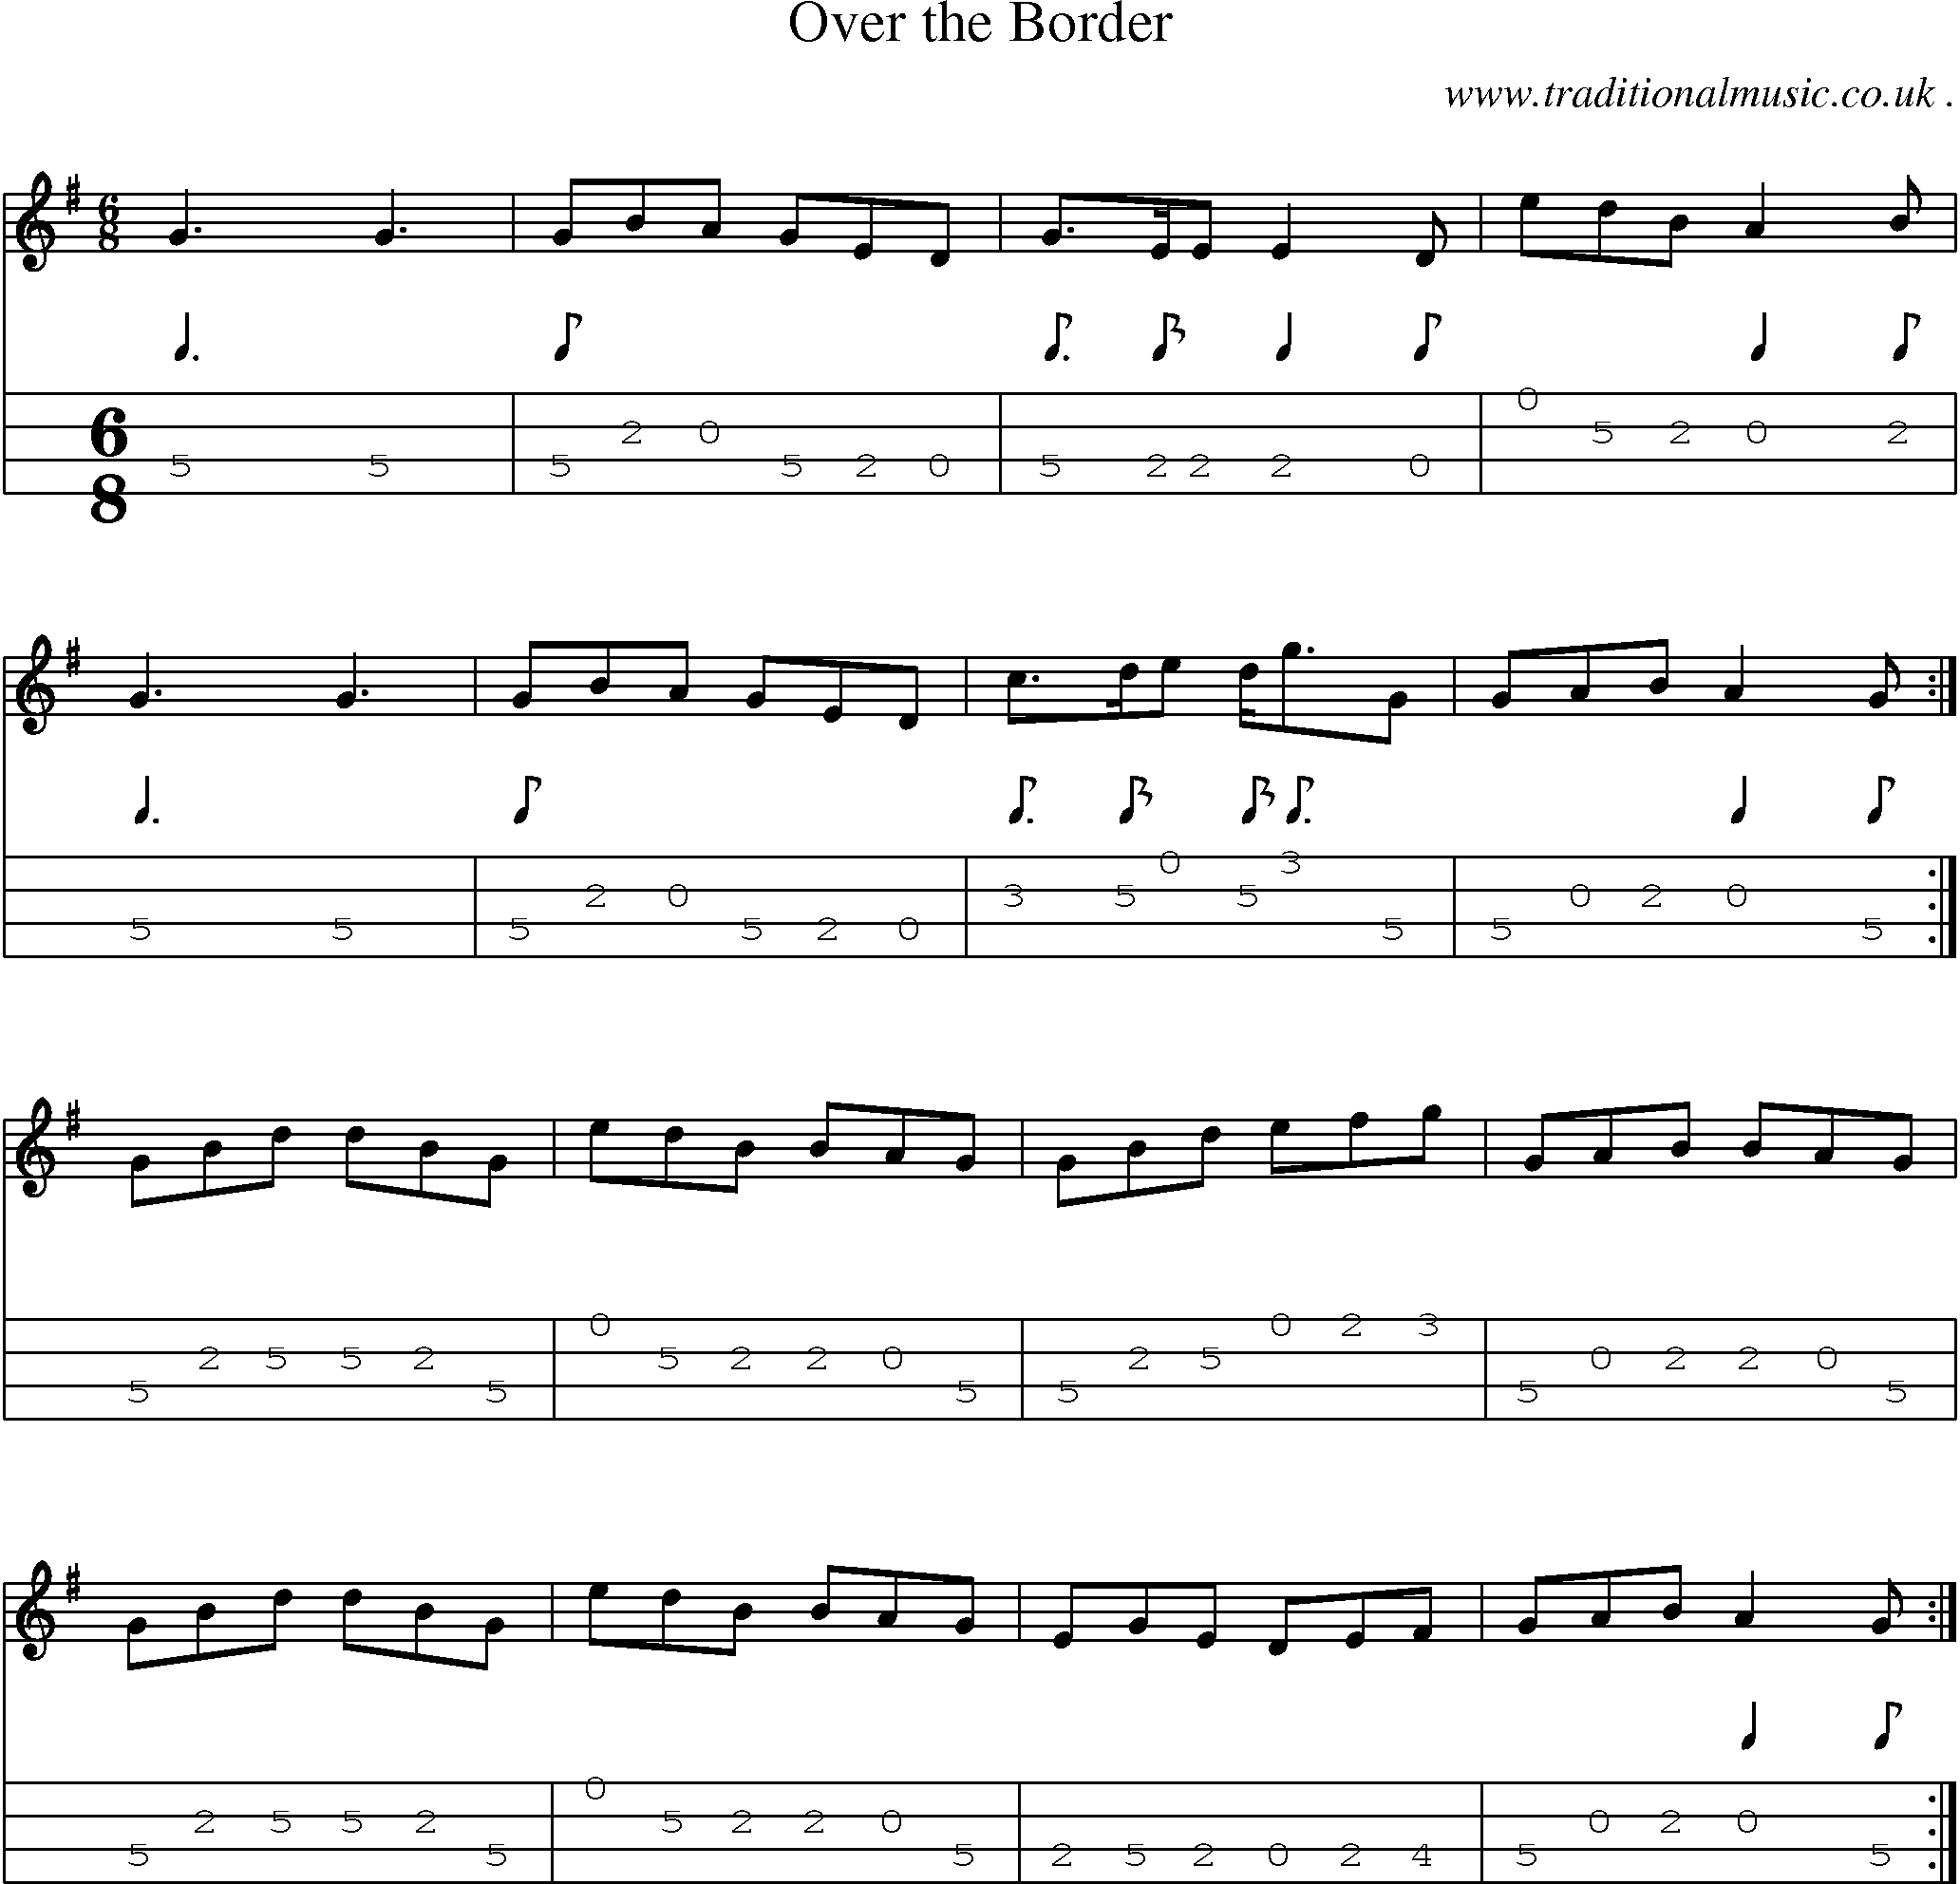 Sheet-music  score, Chords and Mandolin Tabs for Over The Border